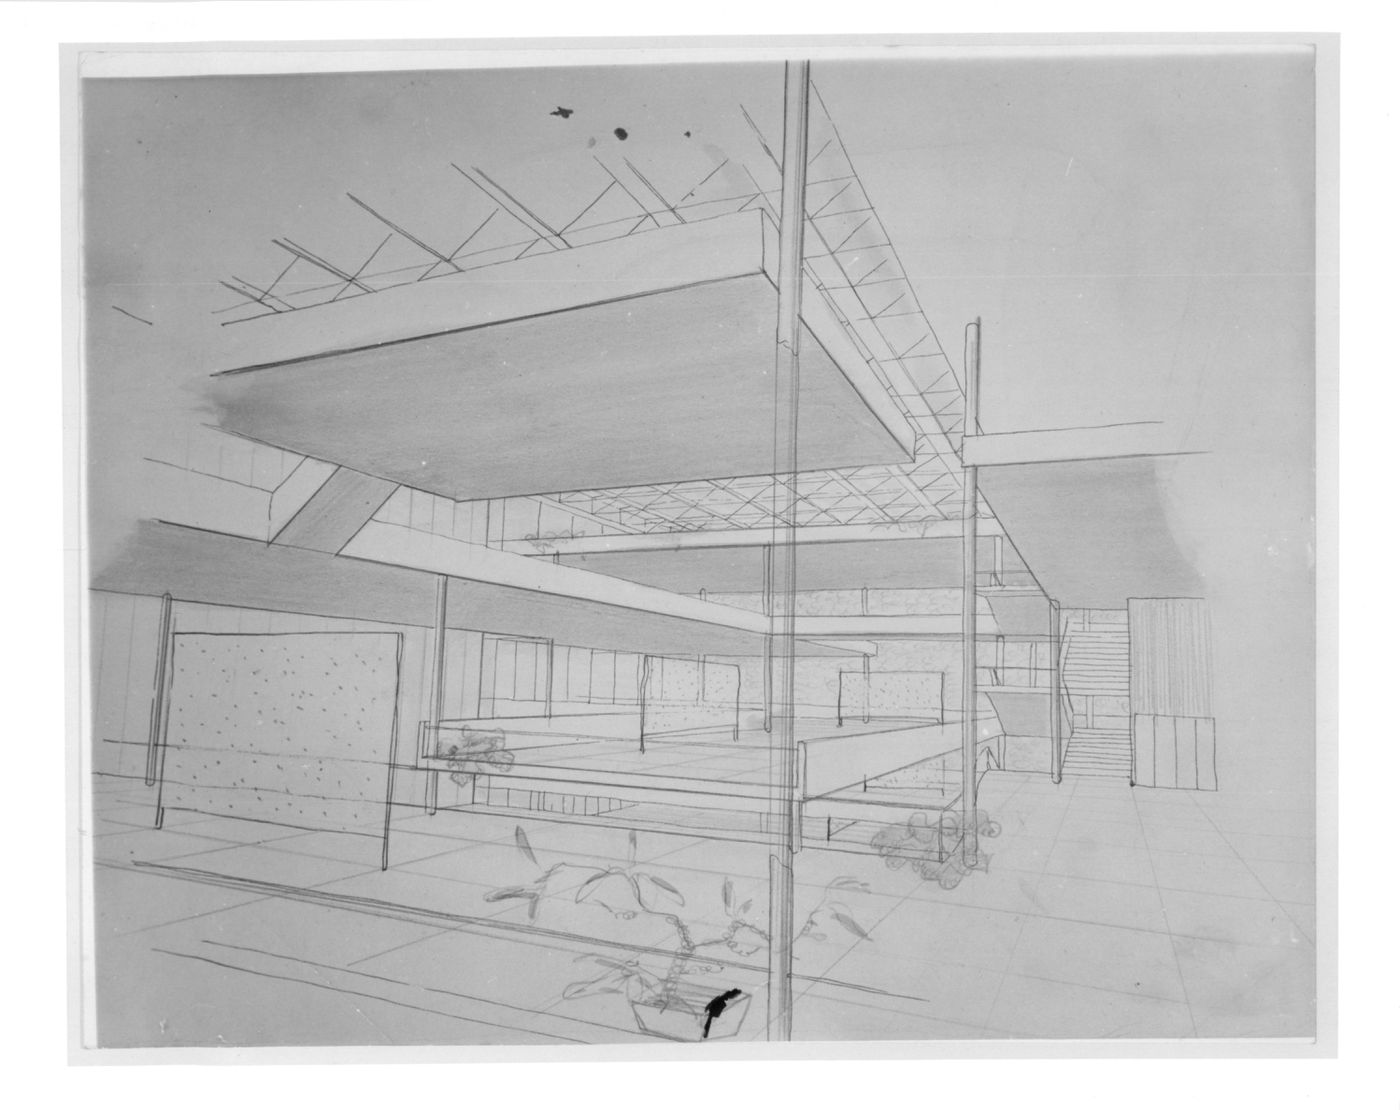 Photographs of perspective drawings of An Arts Cente for Vancouver (Thesis Project)